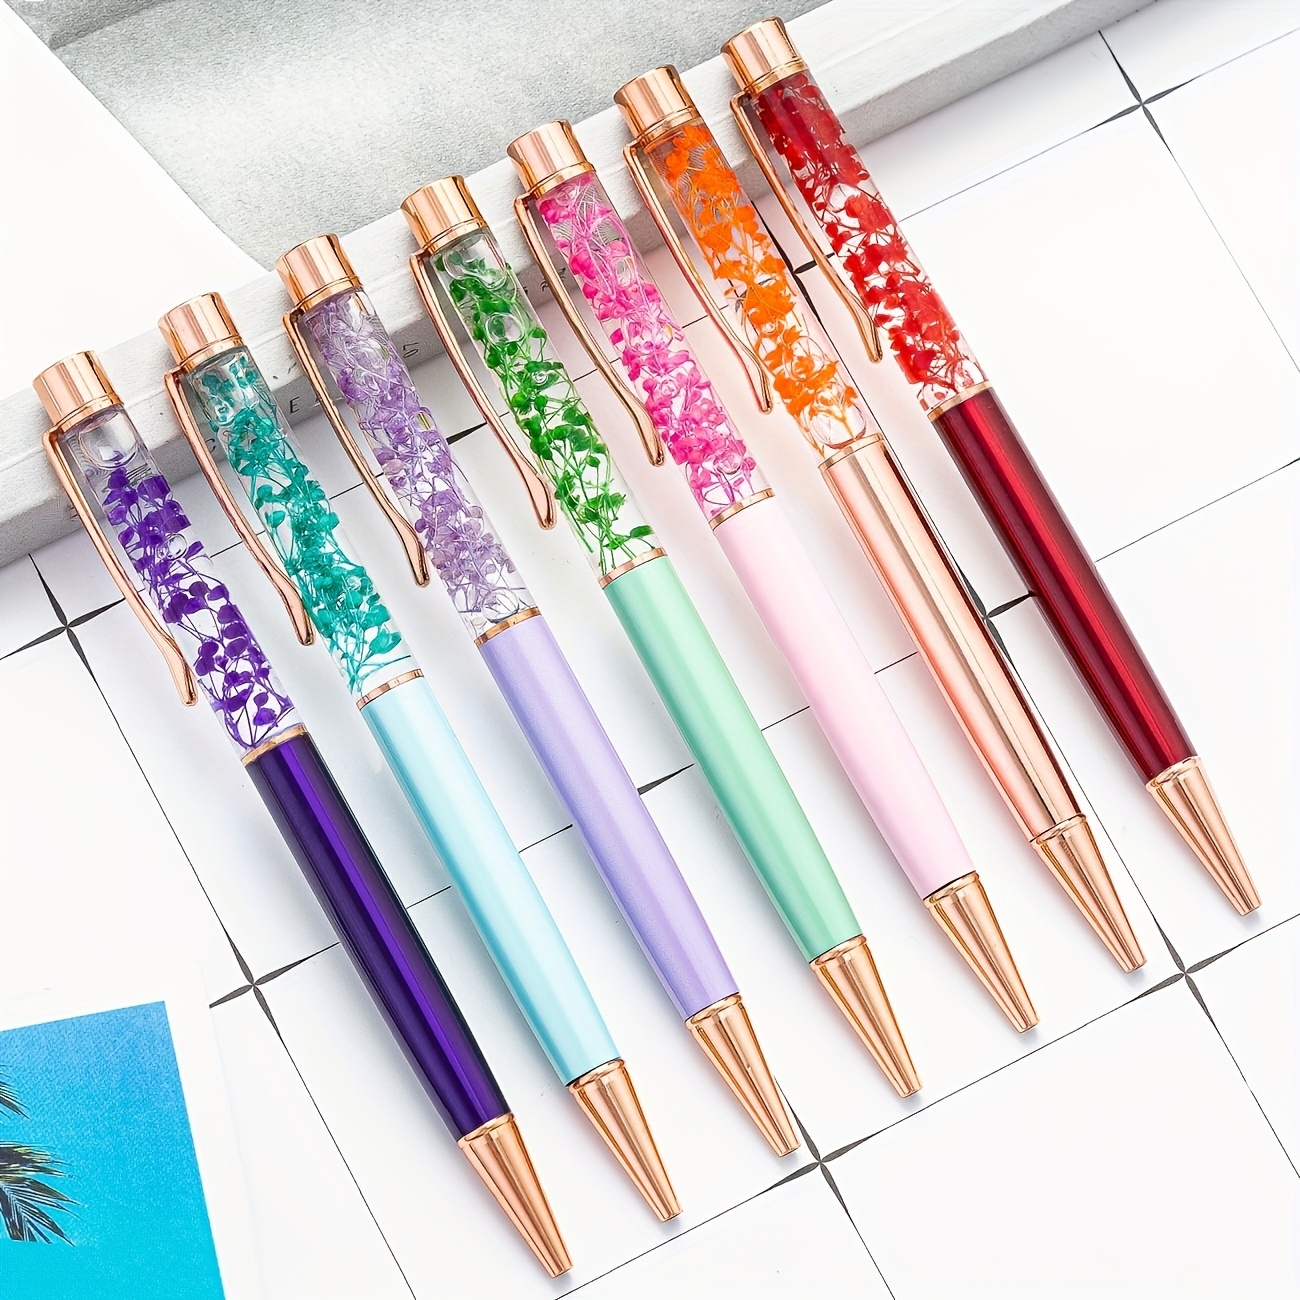 Shuttle Art Colored Retractable Gel Pens, 11 Vintage Ink Colors, Cute Pens 0.7mm Medium Point Quick Drying for Writing Drawing Journaling Note Taking